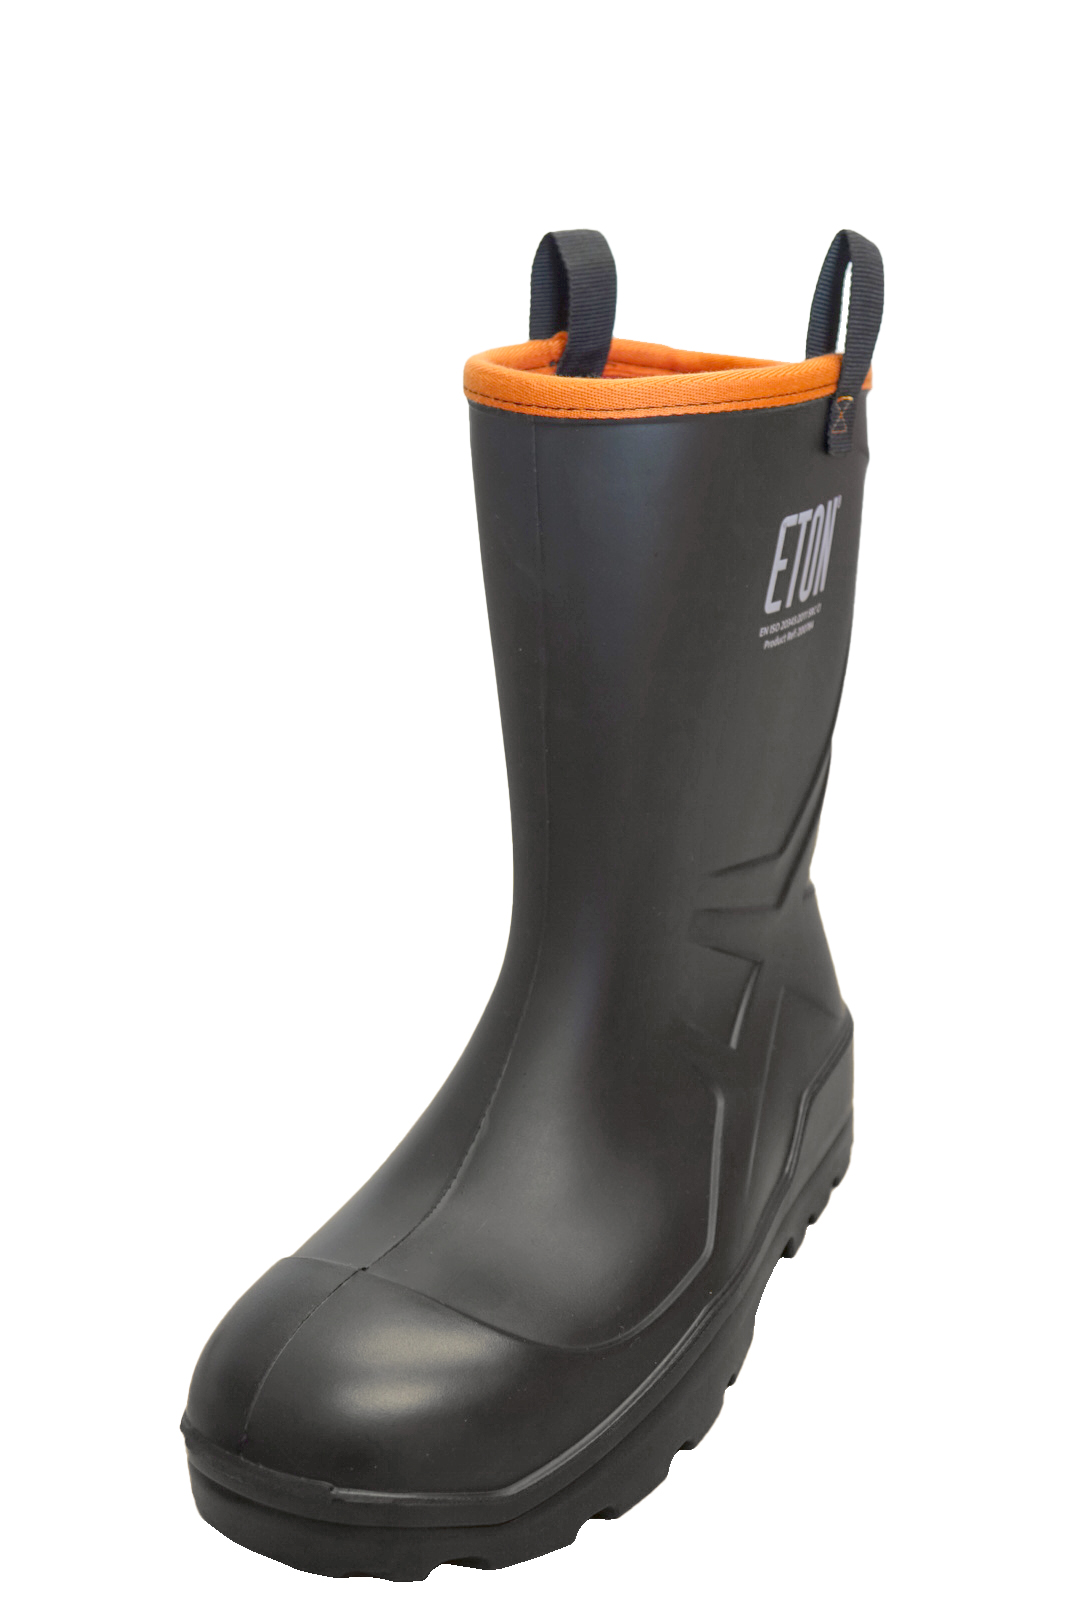 PU Rigger Steel Full Safety Wellington - Size 7